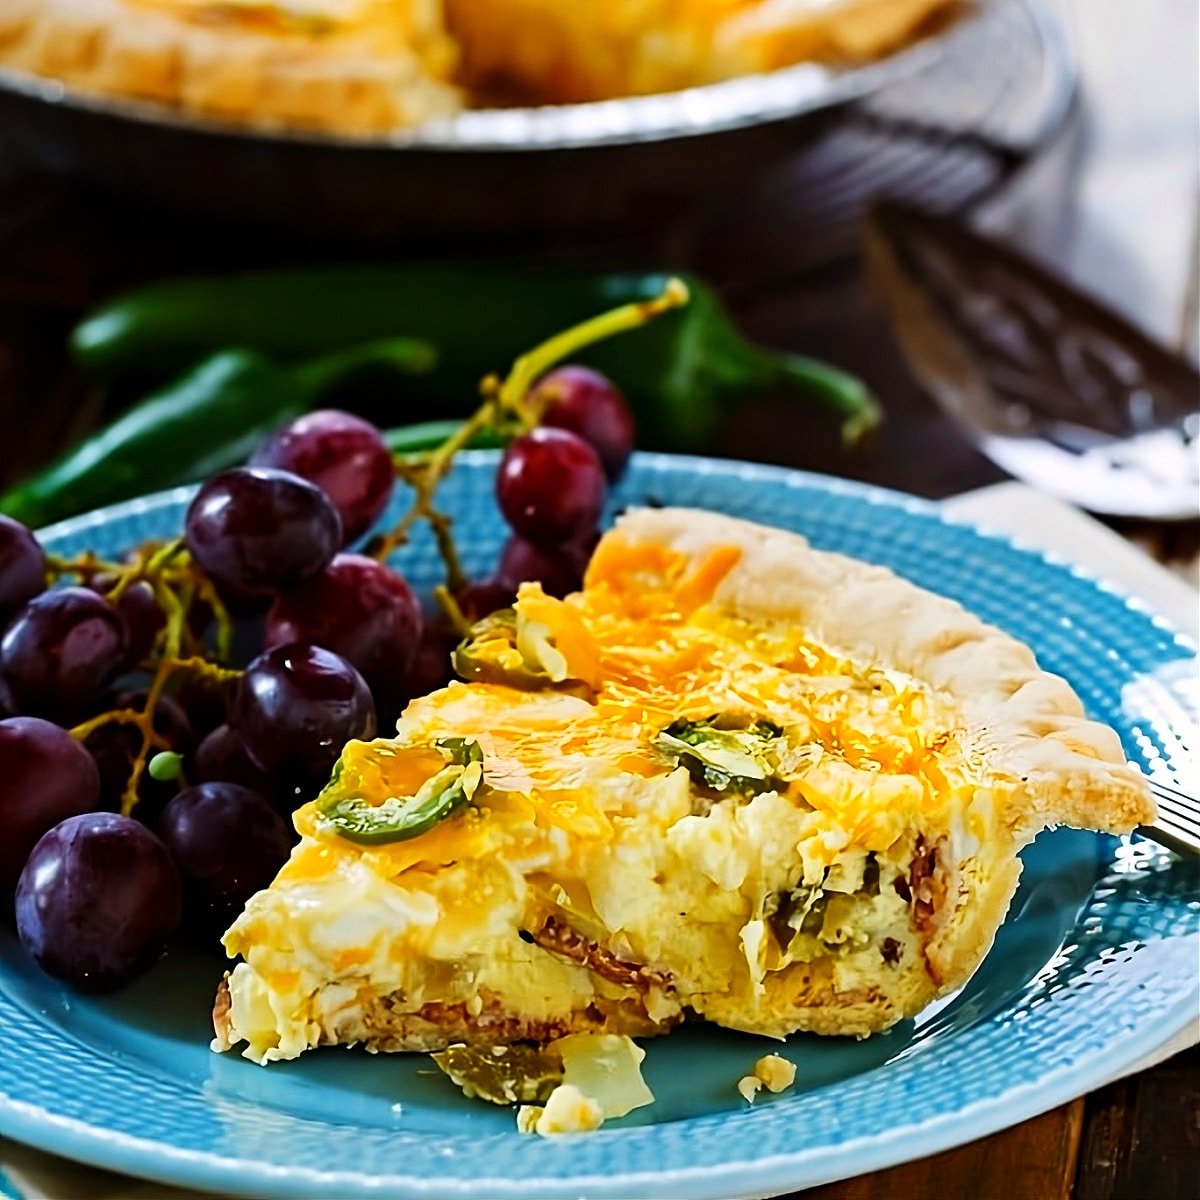 Slice of Jalapeno Popper Quiche on plate with red grapes.